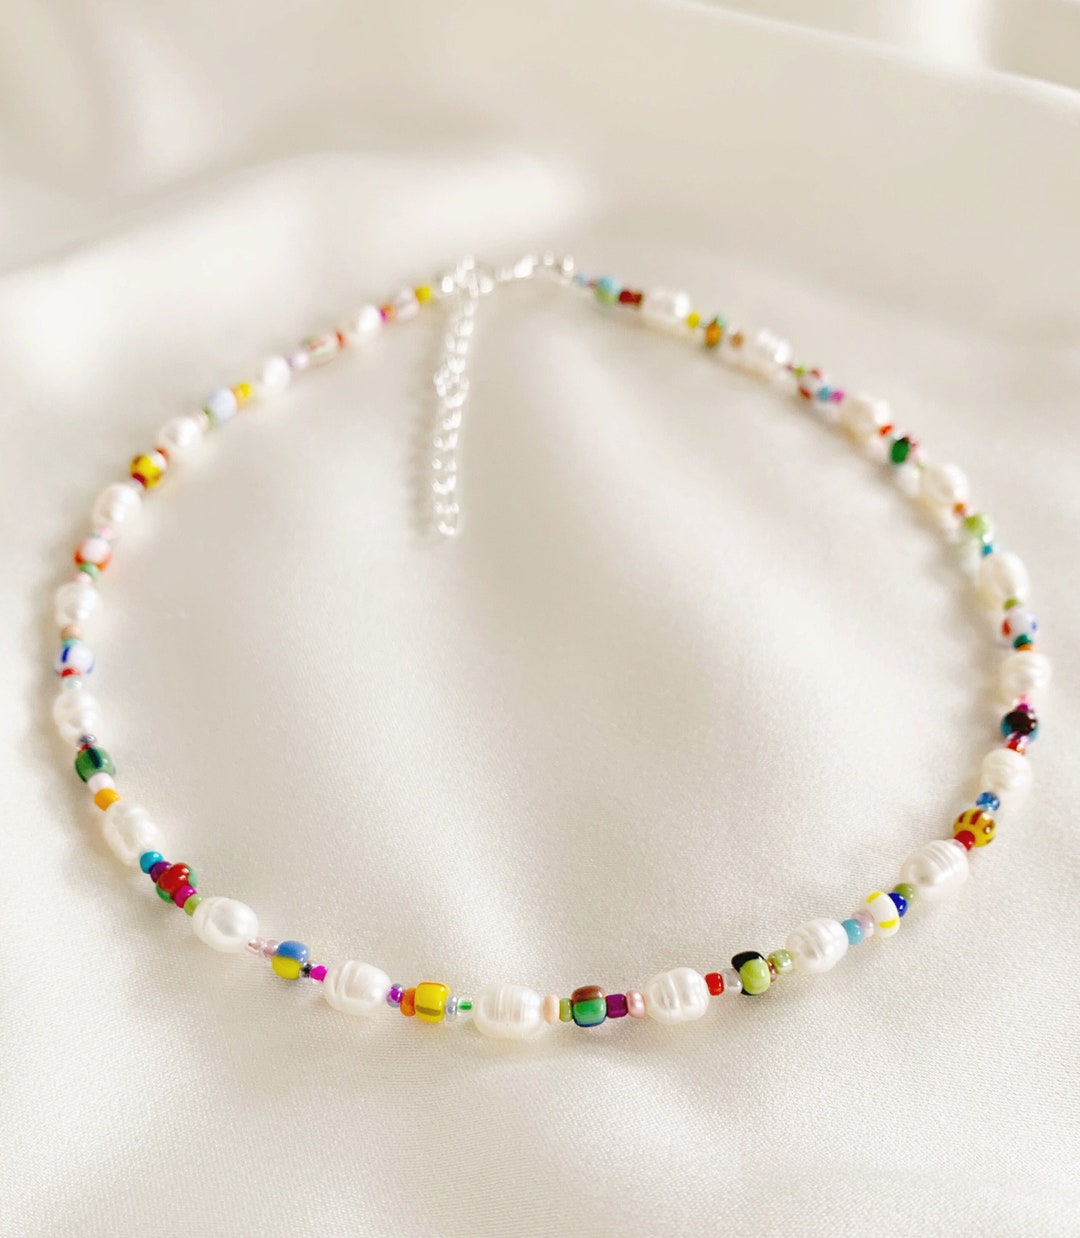 Freshwater Pearl Necklace With Mixed Patterned Colourful Beads - Etsy